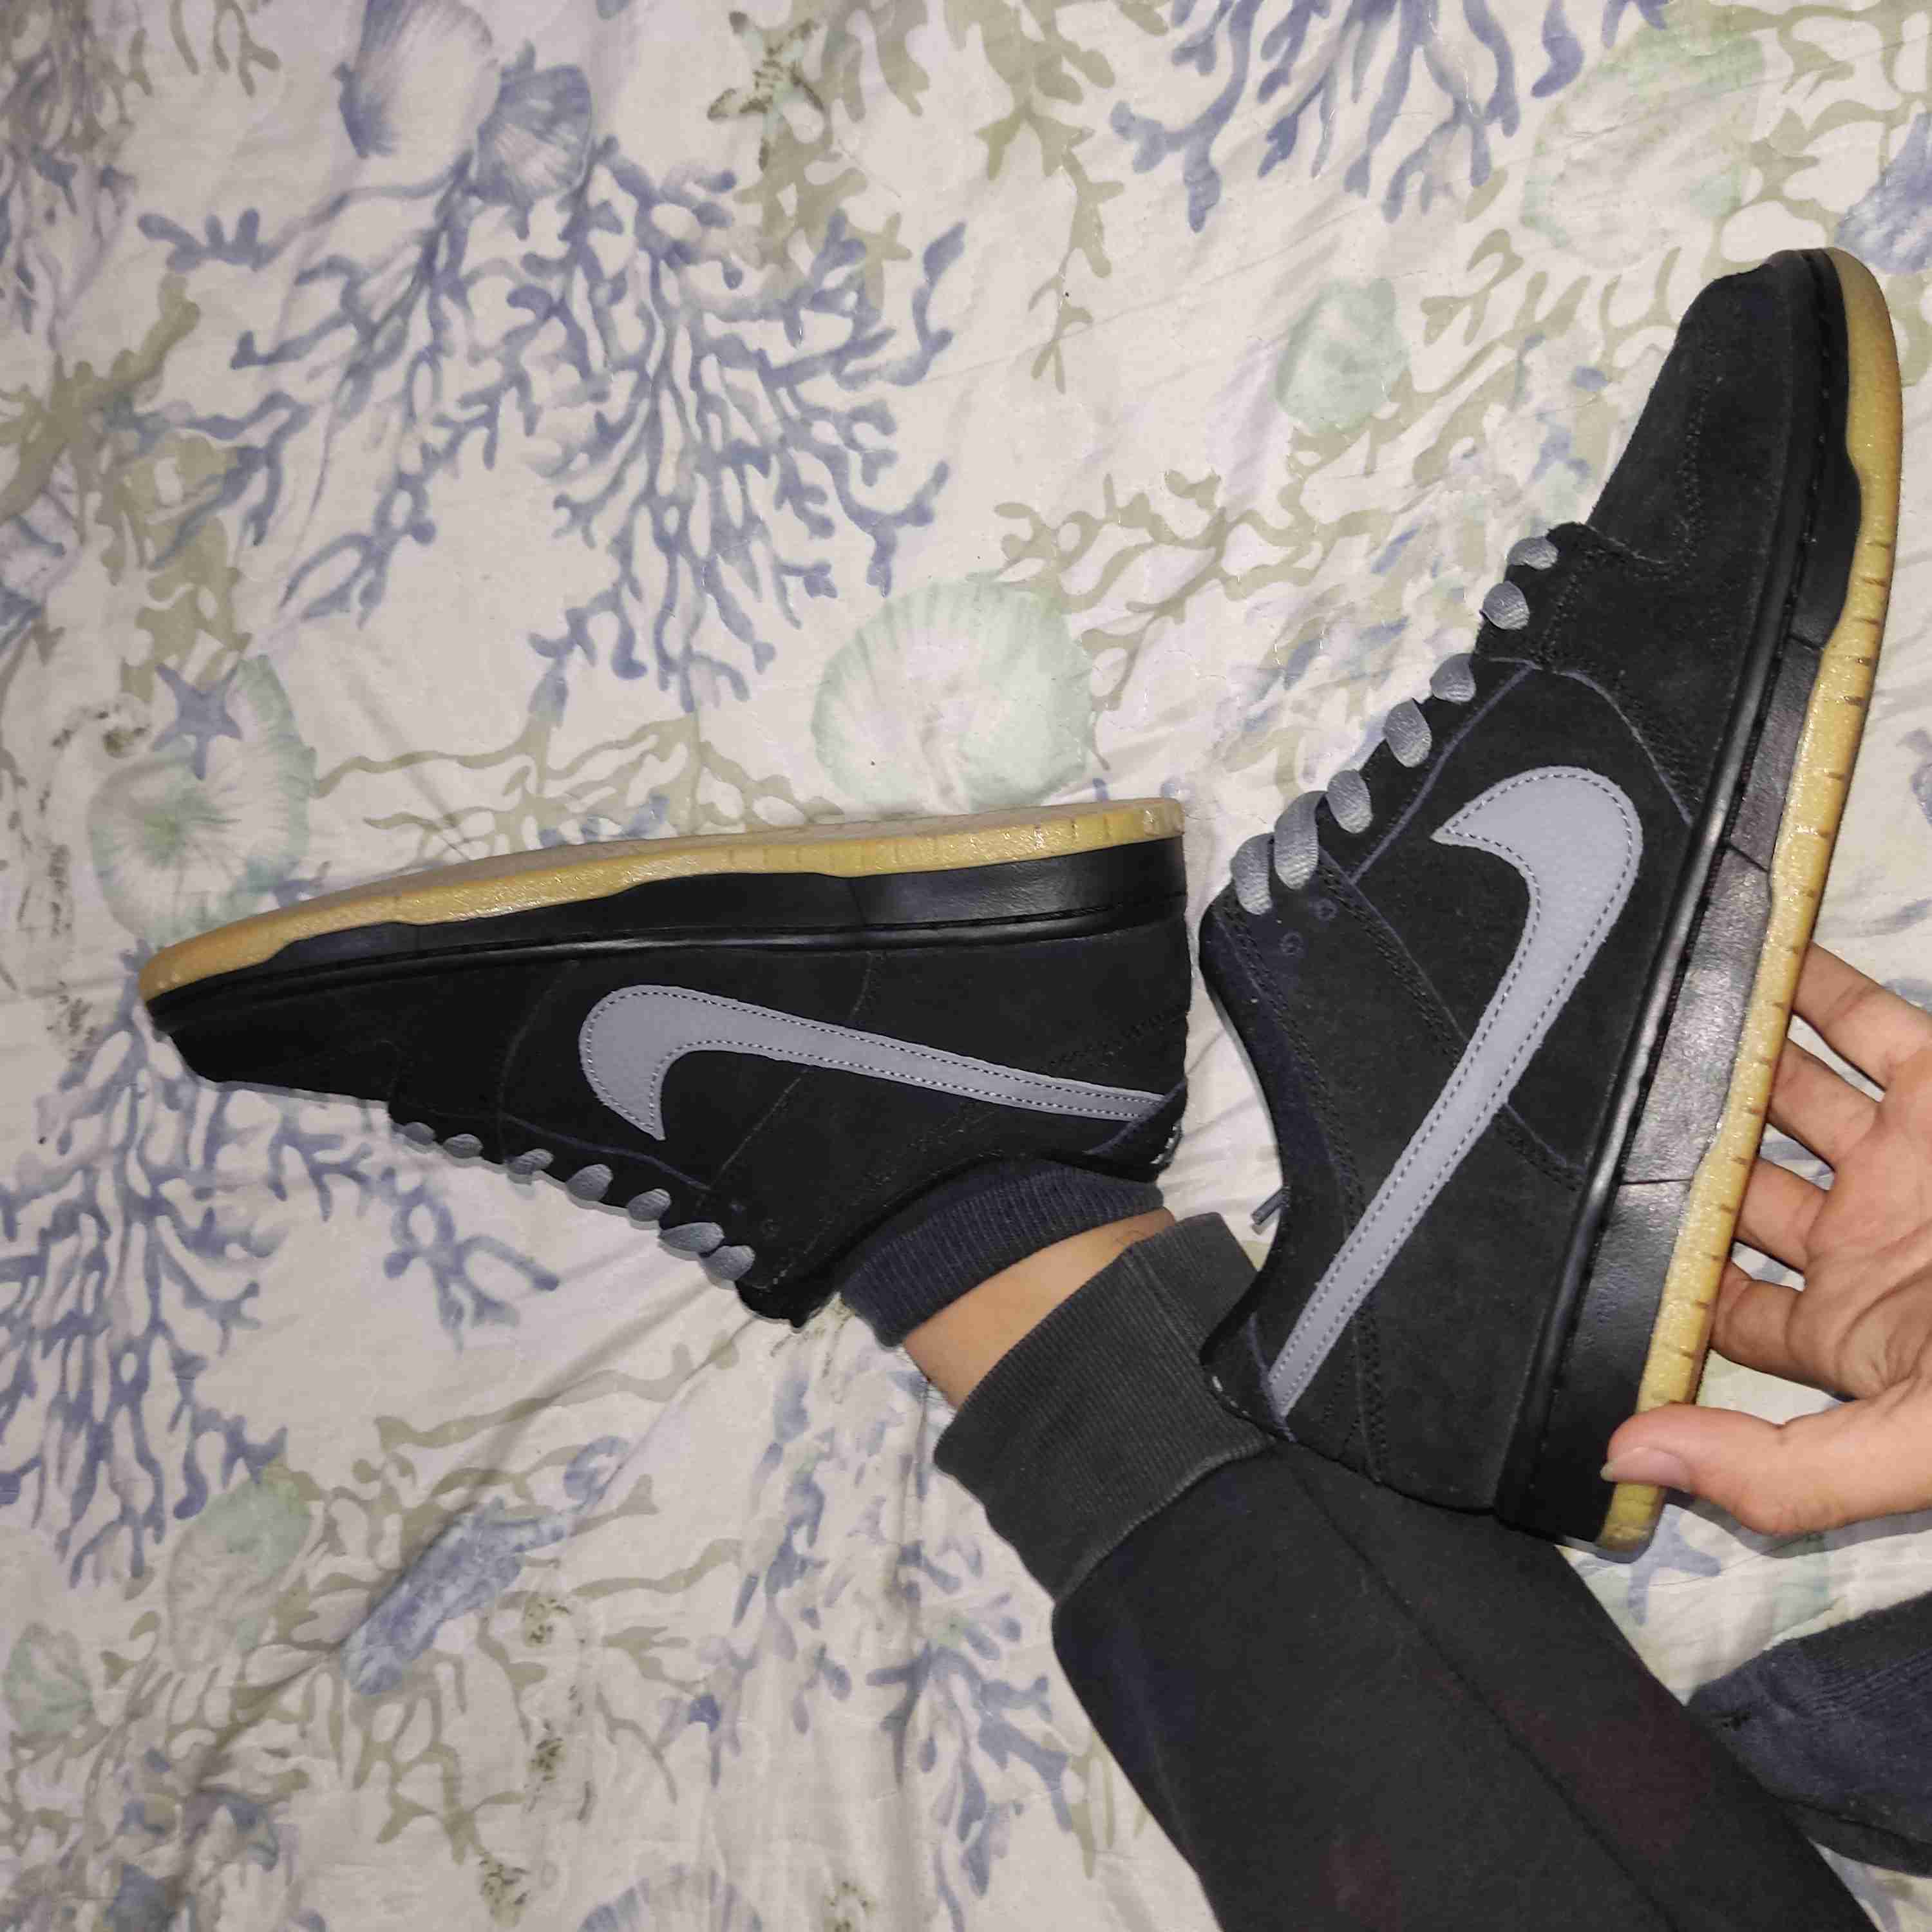 The Comeback of the Nike SB Dunk Low 'Fog